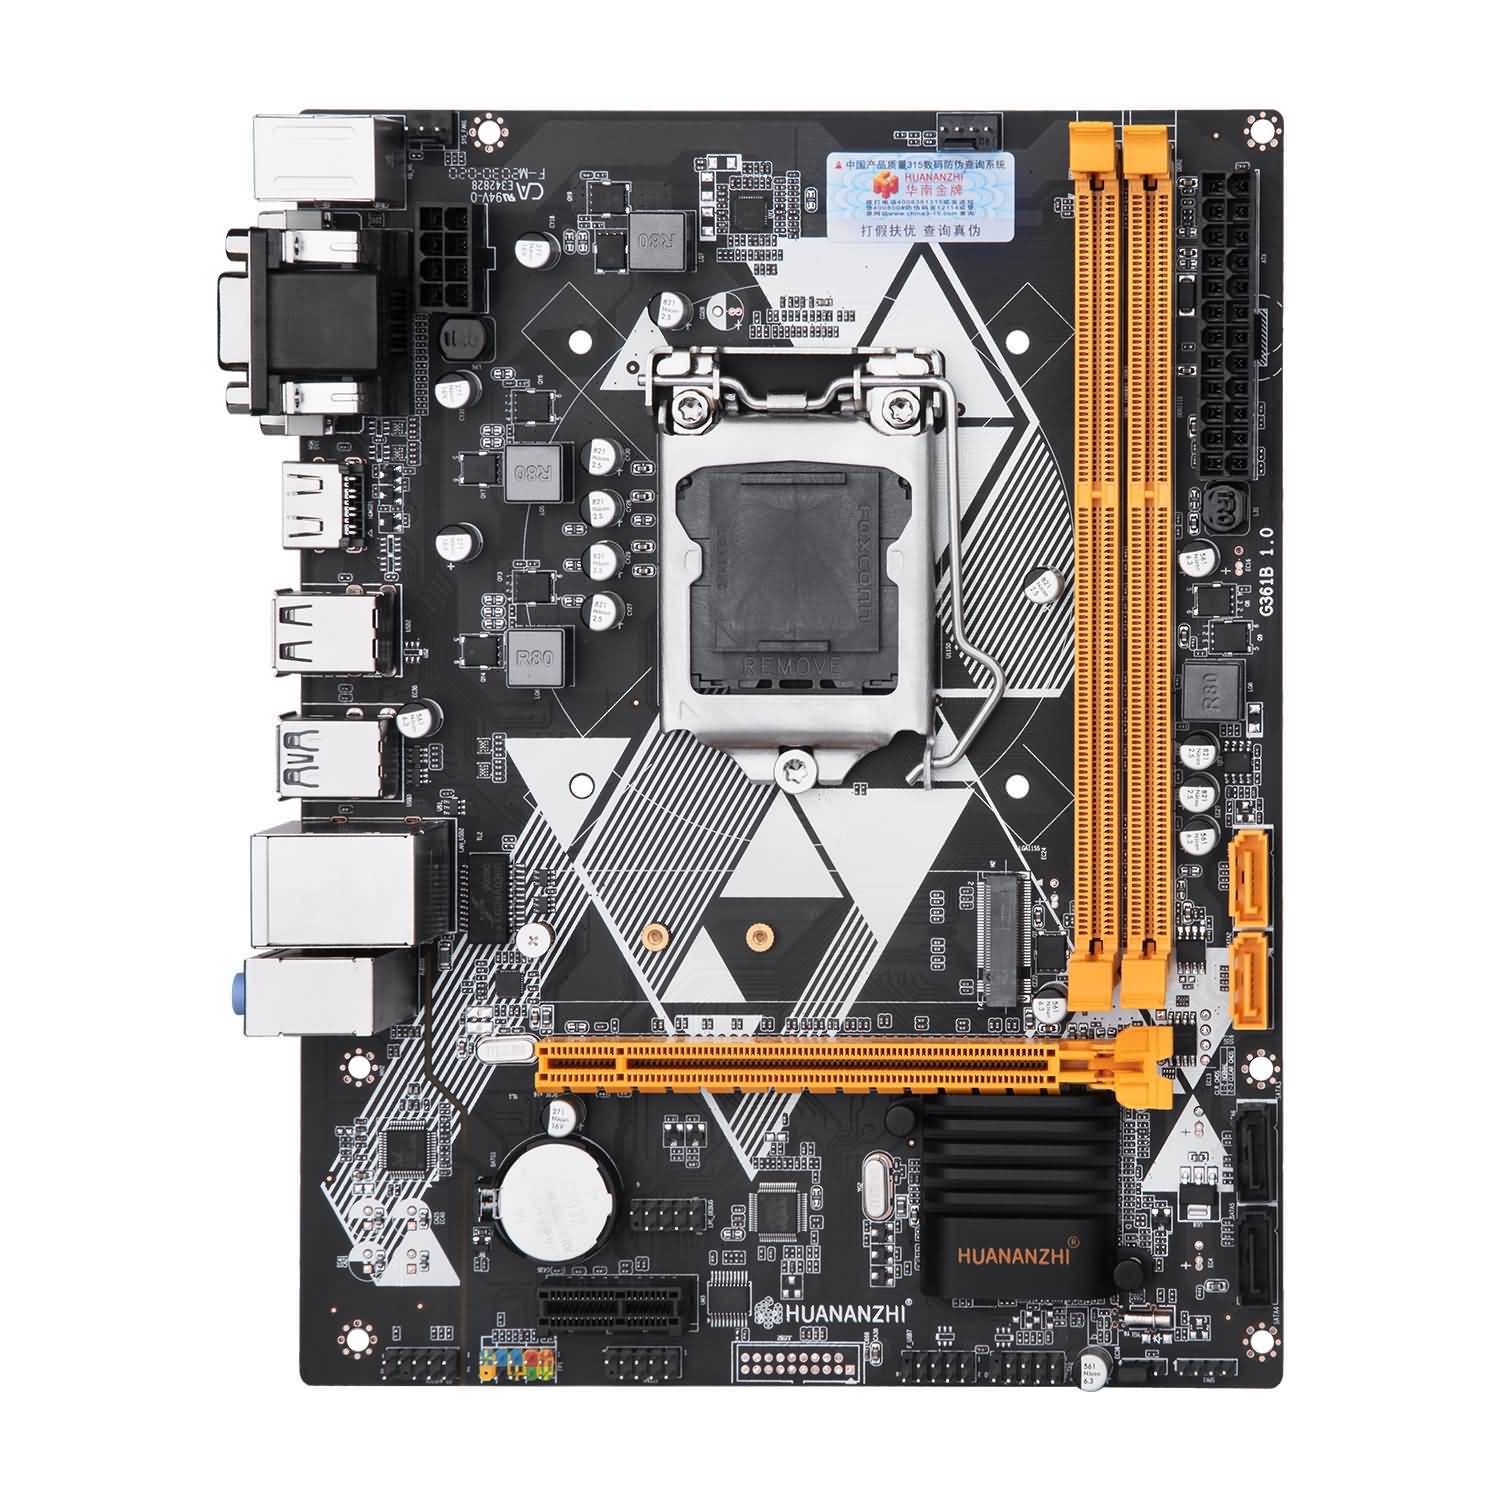 Download Huananzhi H81 Motherboard Free